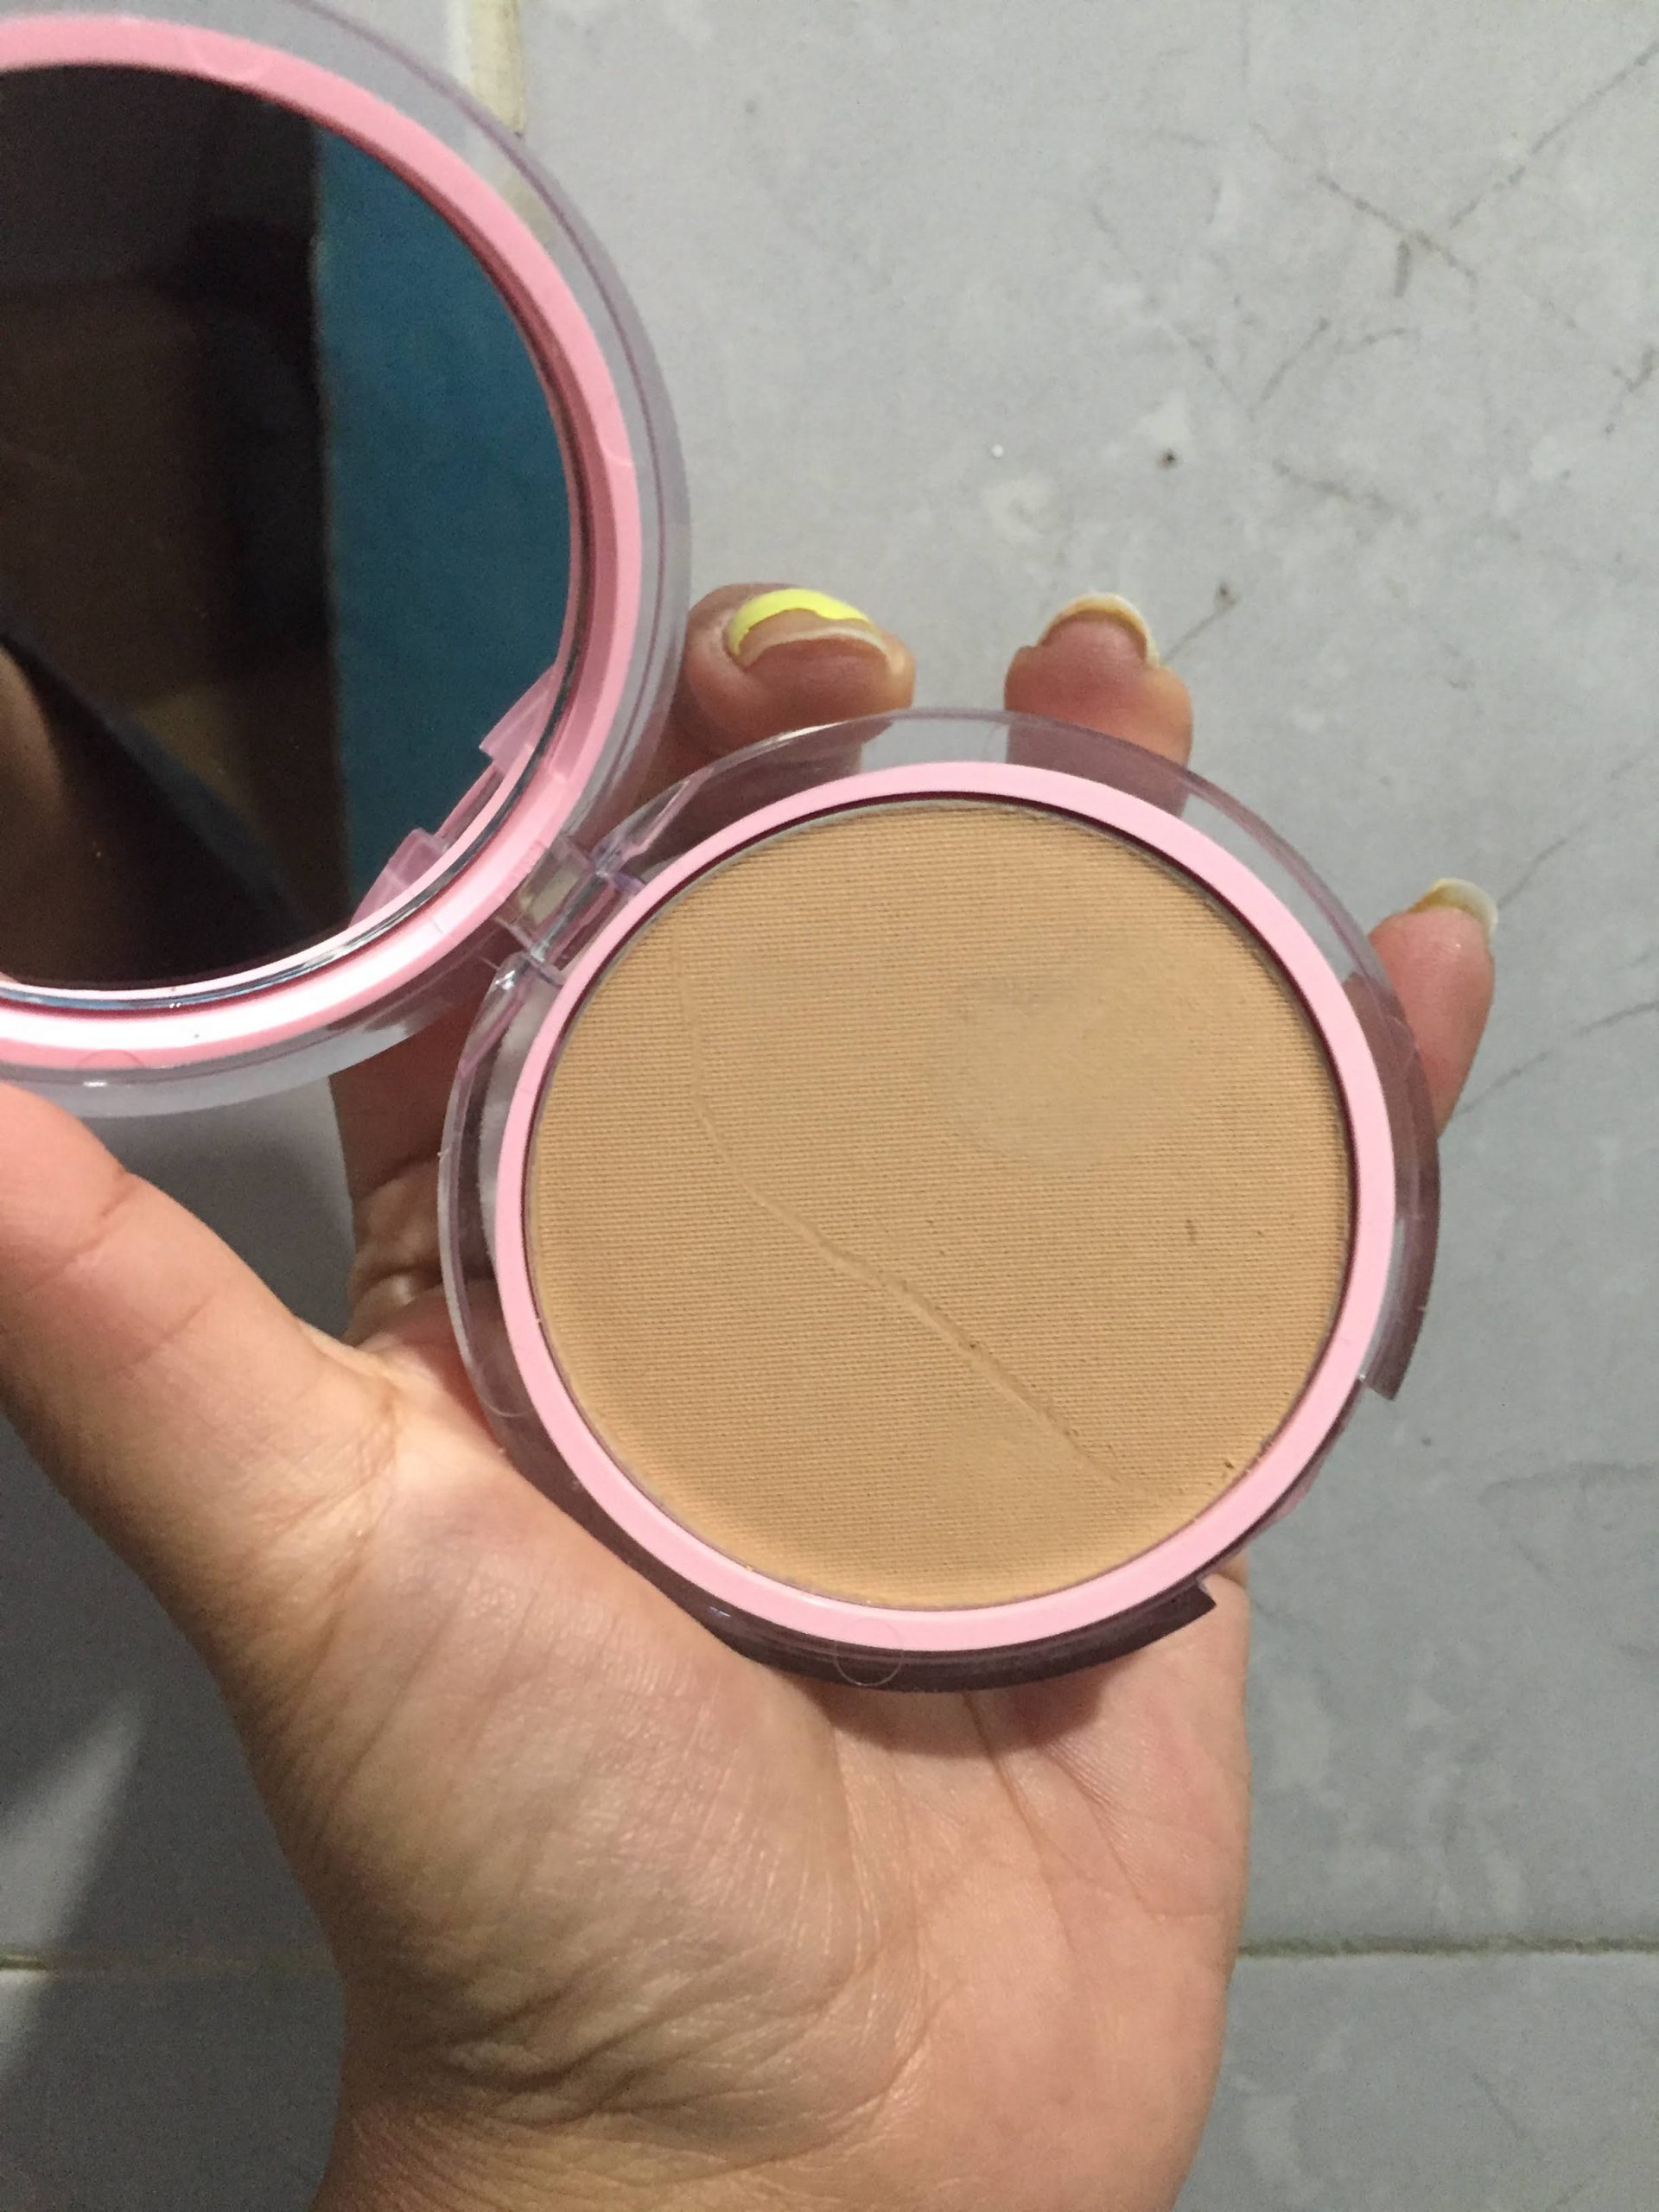 COVERGIRL CLEAN FREASH POLVO COMPACTO